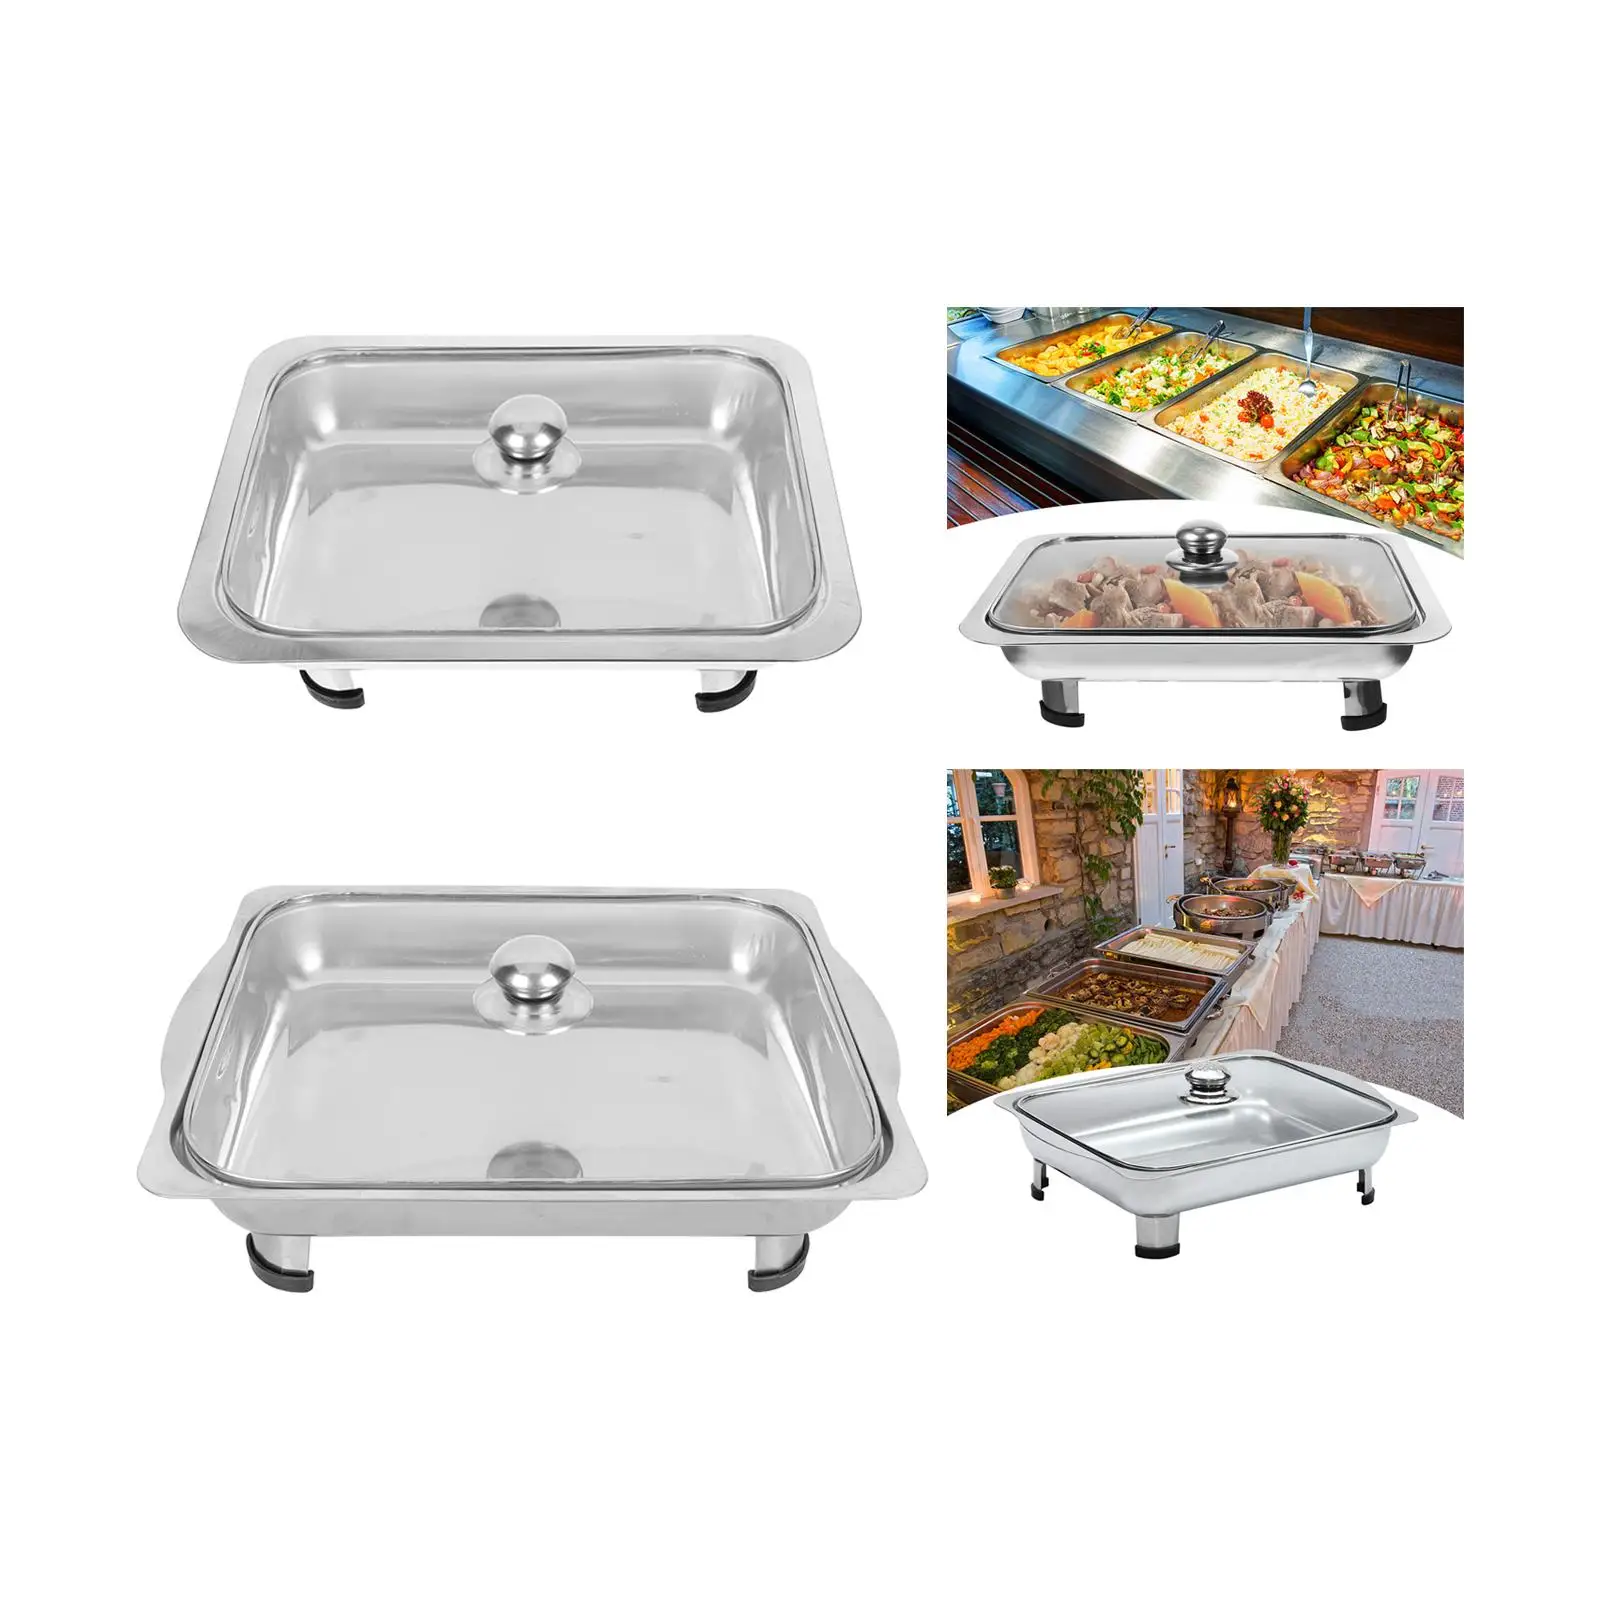 Buffet Dish Tray Food Warmer Transparent Cover Chafing Dish Stainless Steel Chafer for Picnic Wedding Parties Holidays Banquet